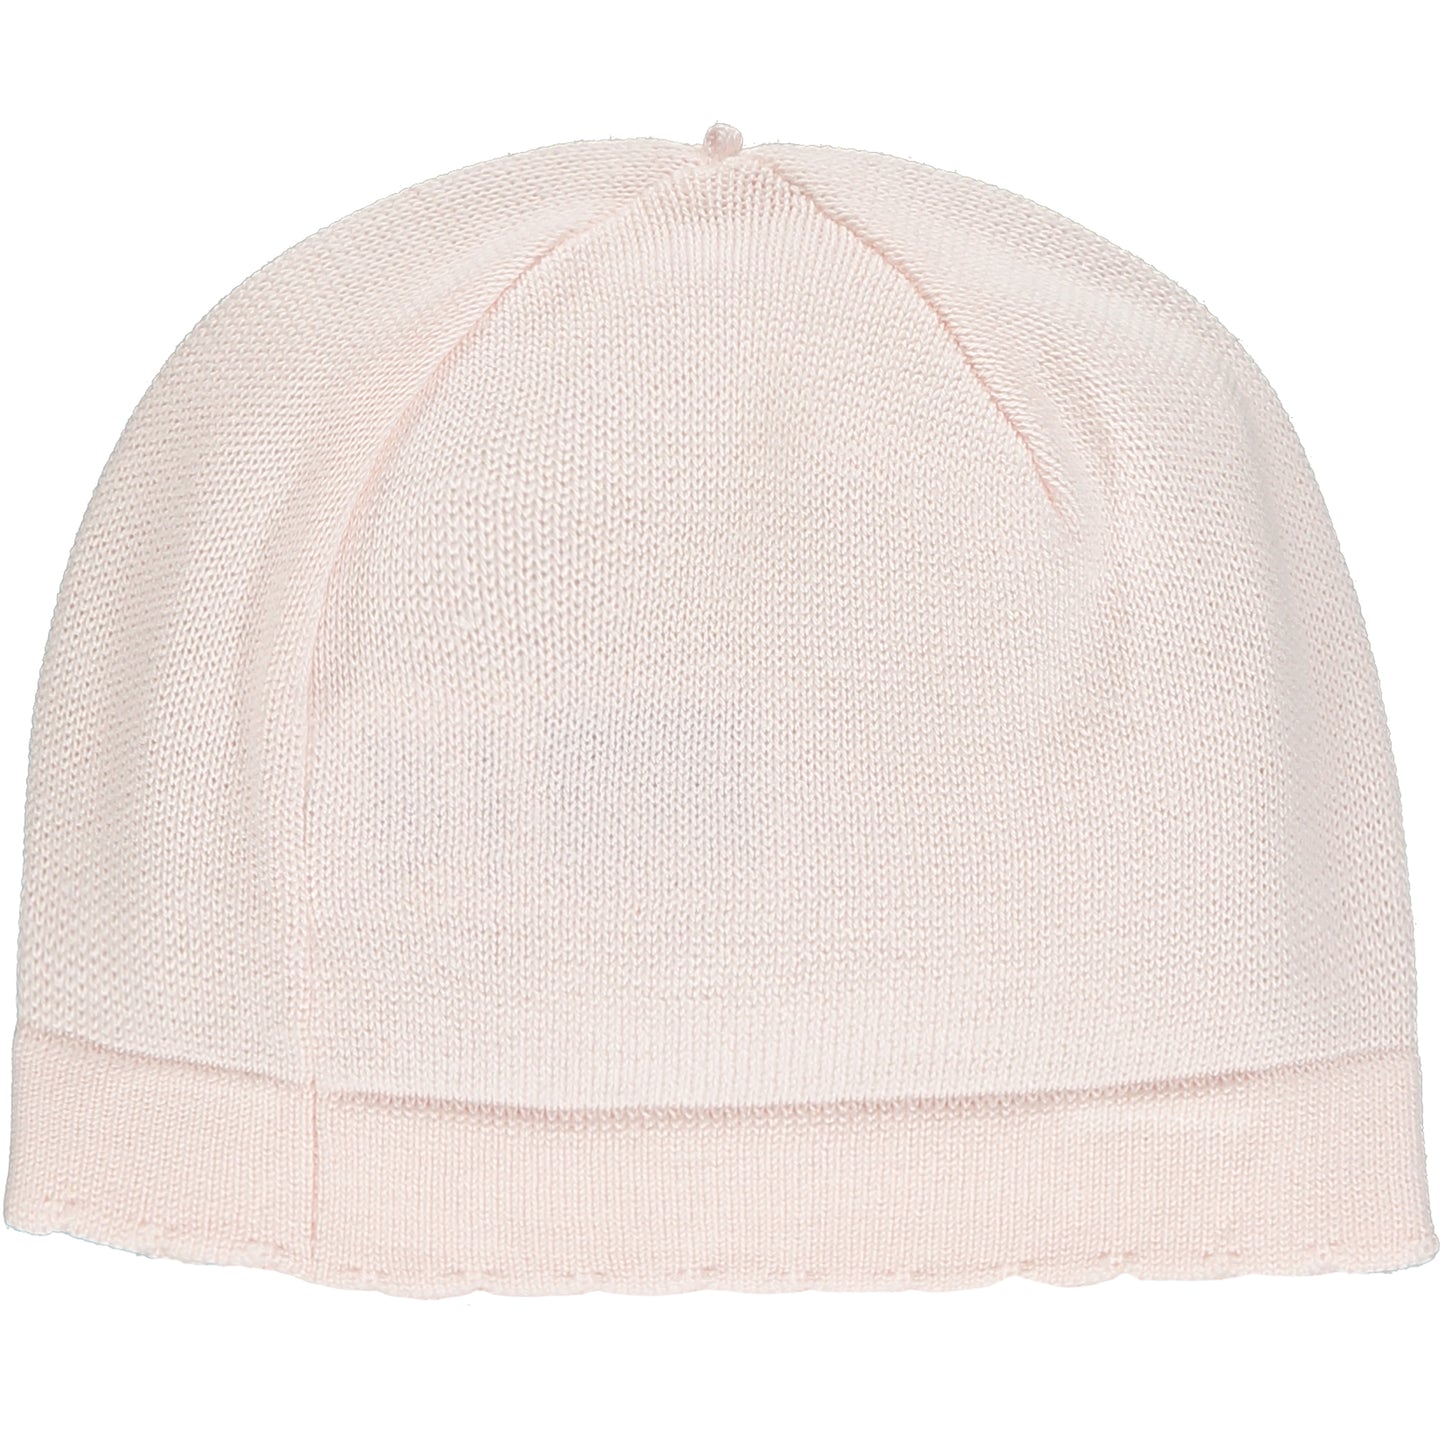 Emile et Rose Baby Girl's Pale Pink Knitted All In One & Hat